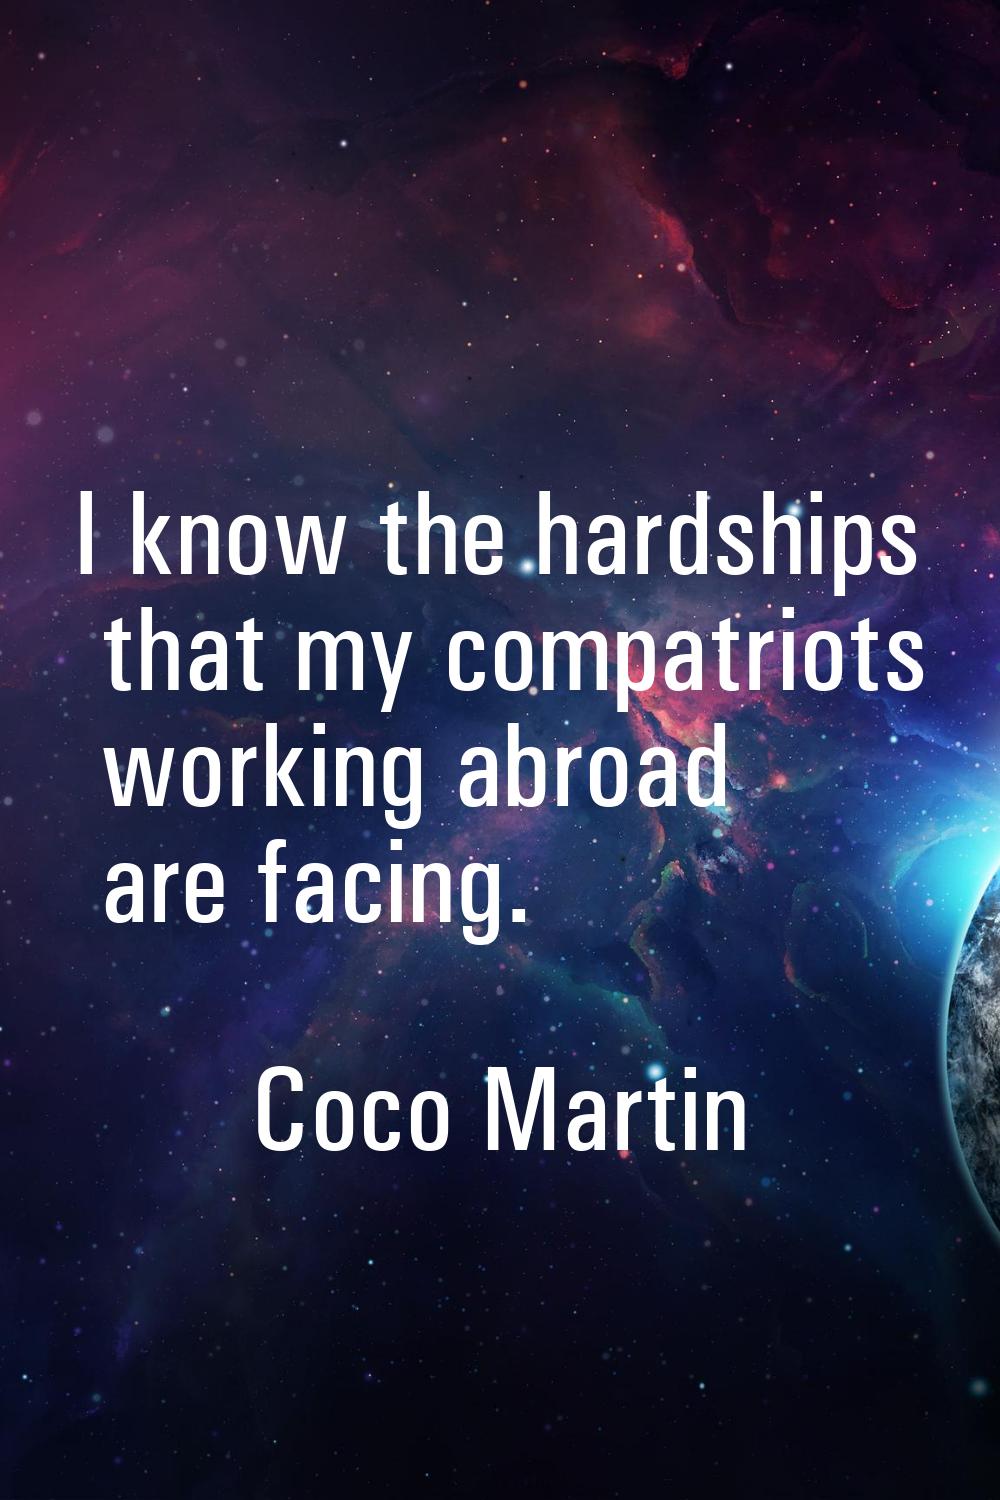 I know the hardships that my compatriots working abroad are facing.